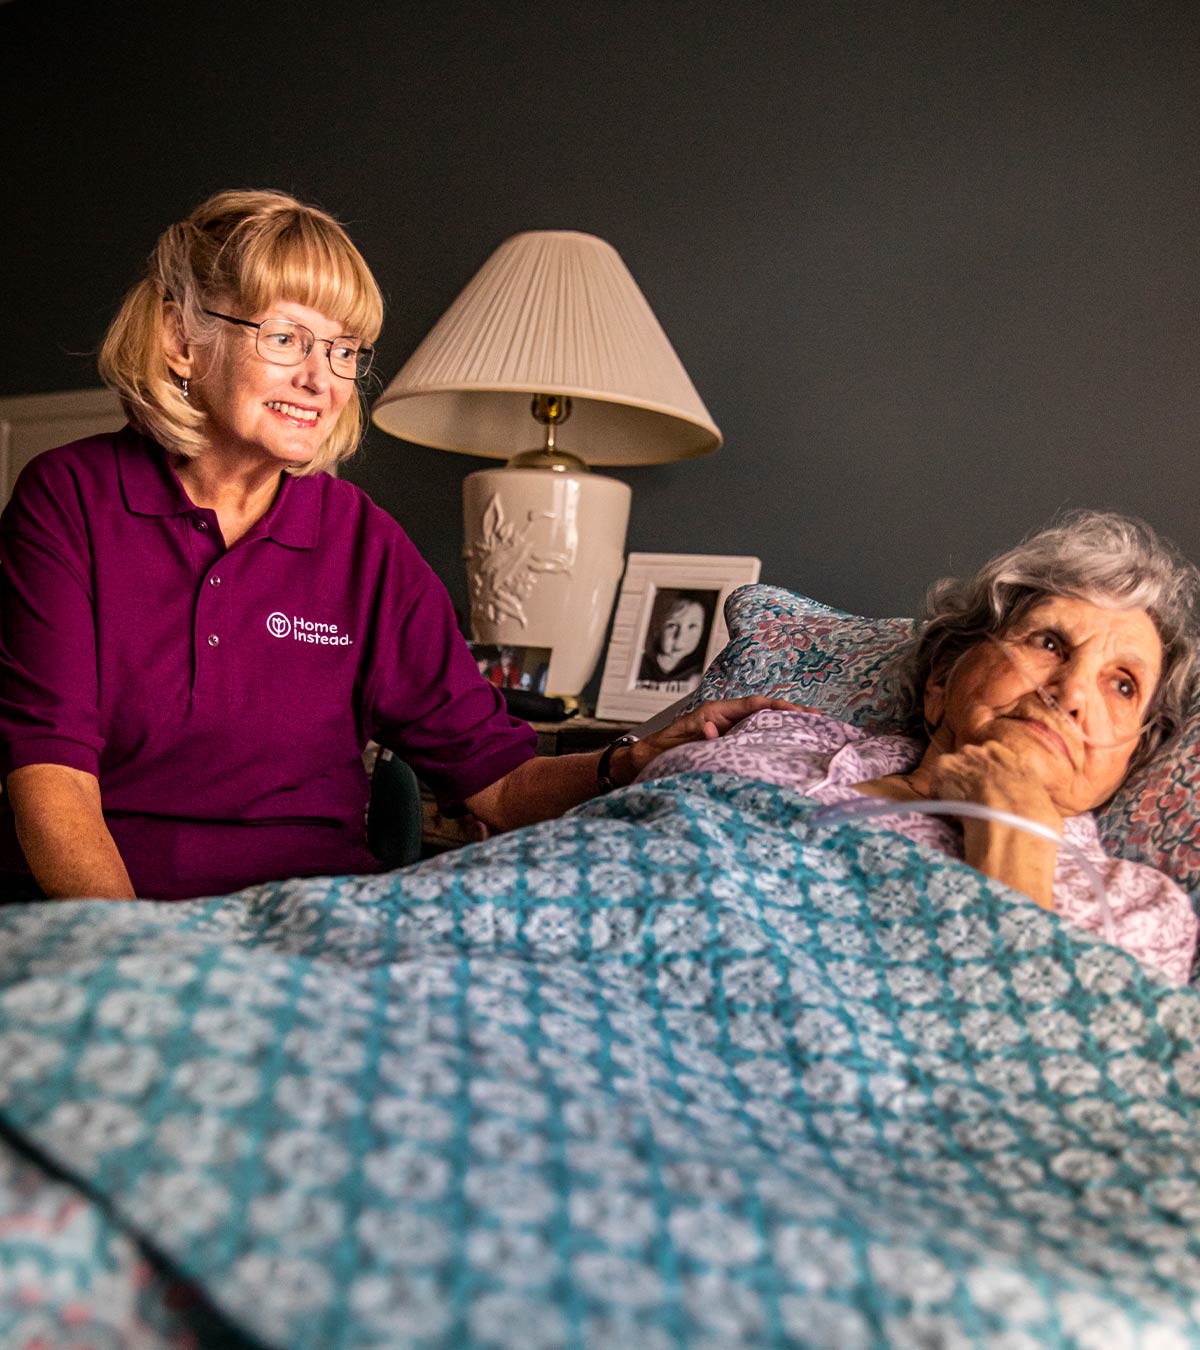 Home Instead CAREGiver sitting next to bed with senior